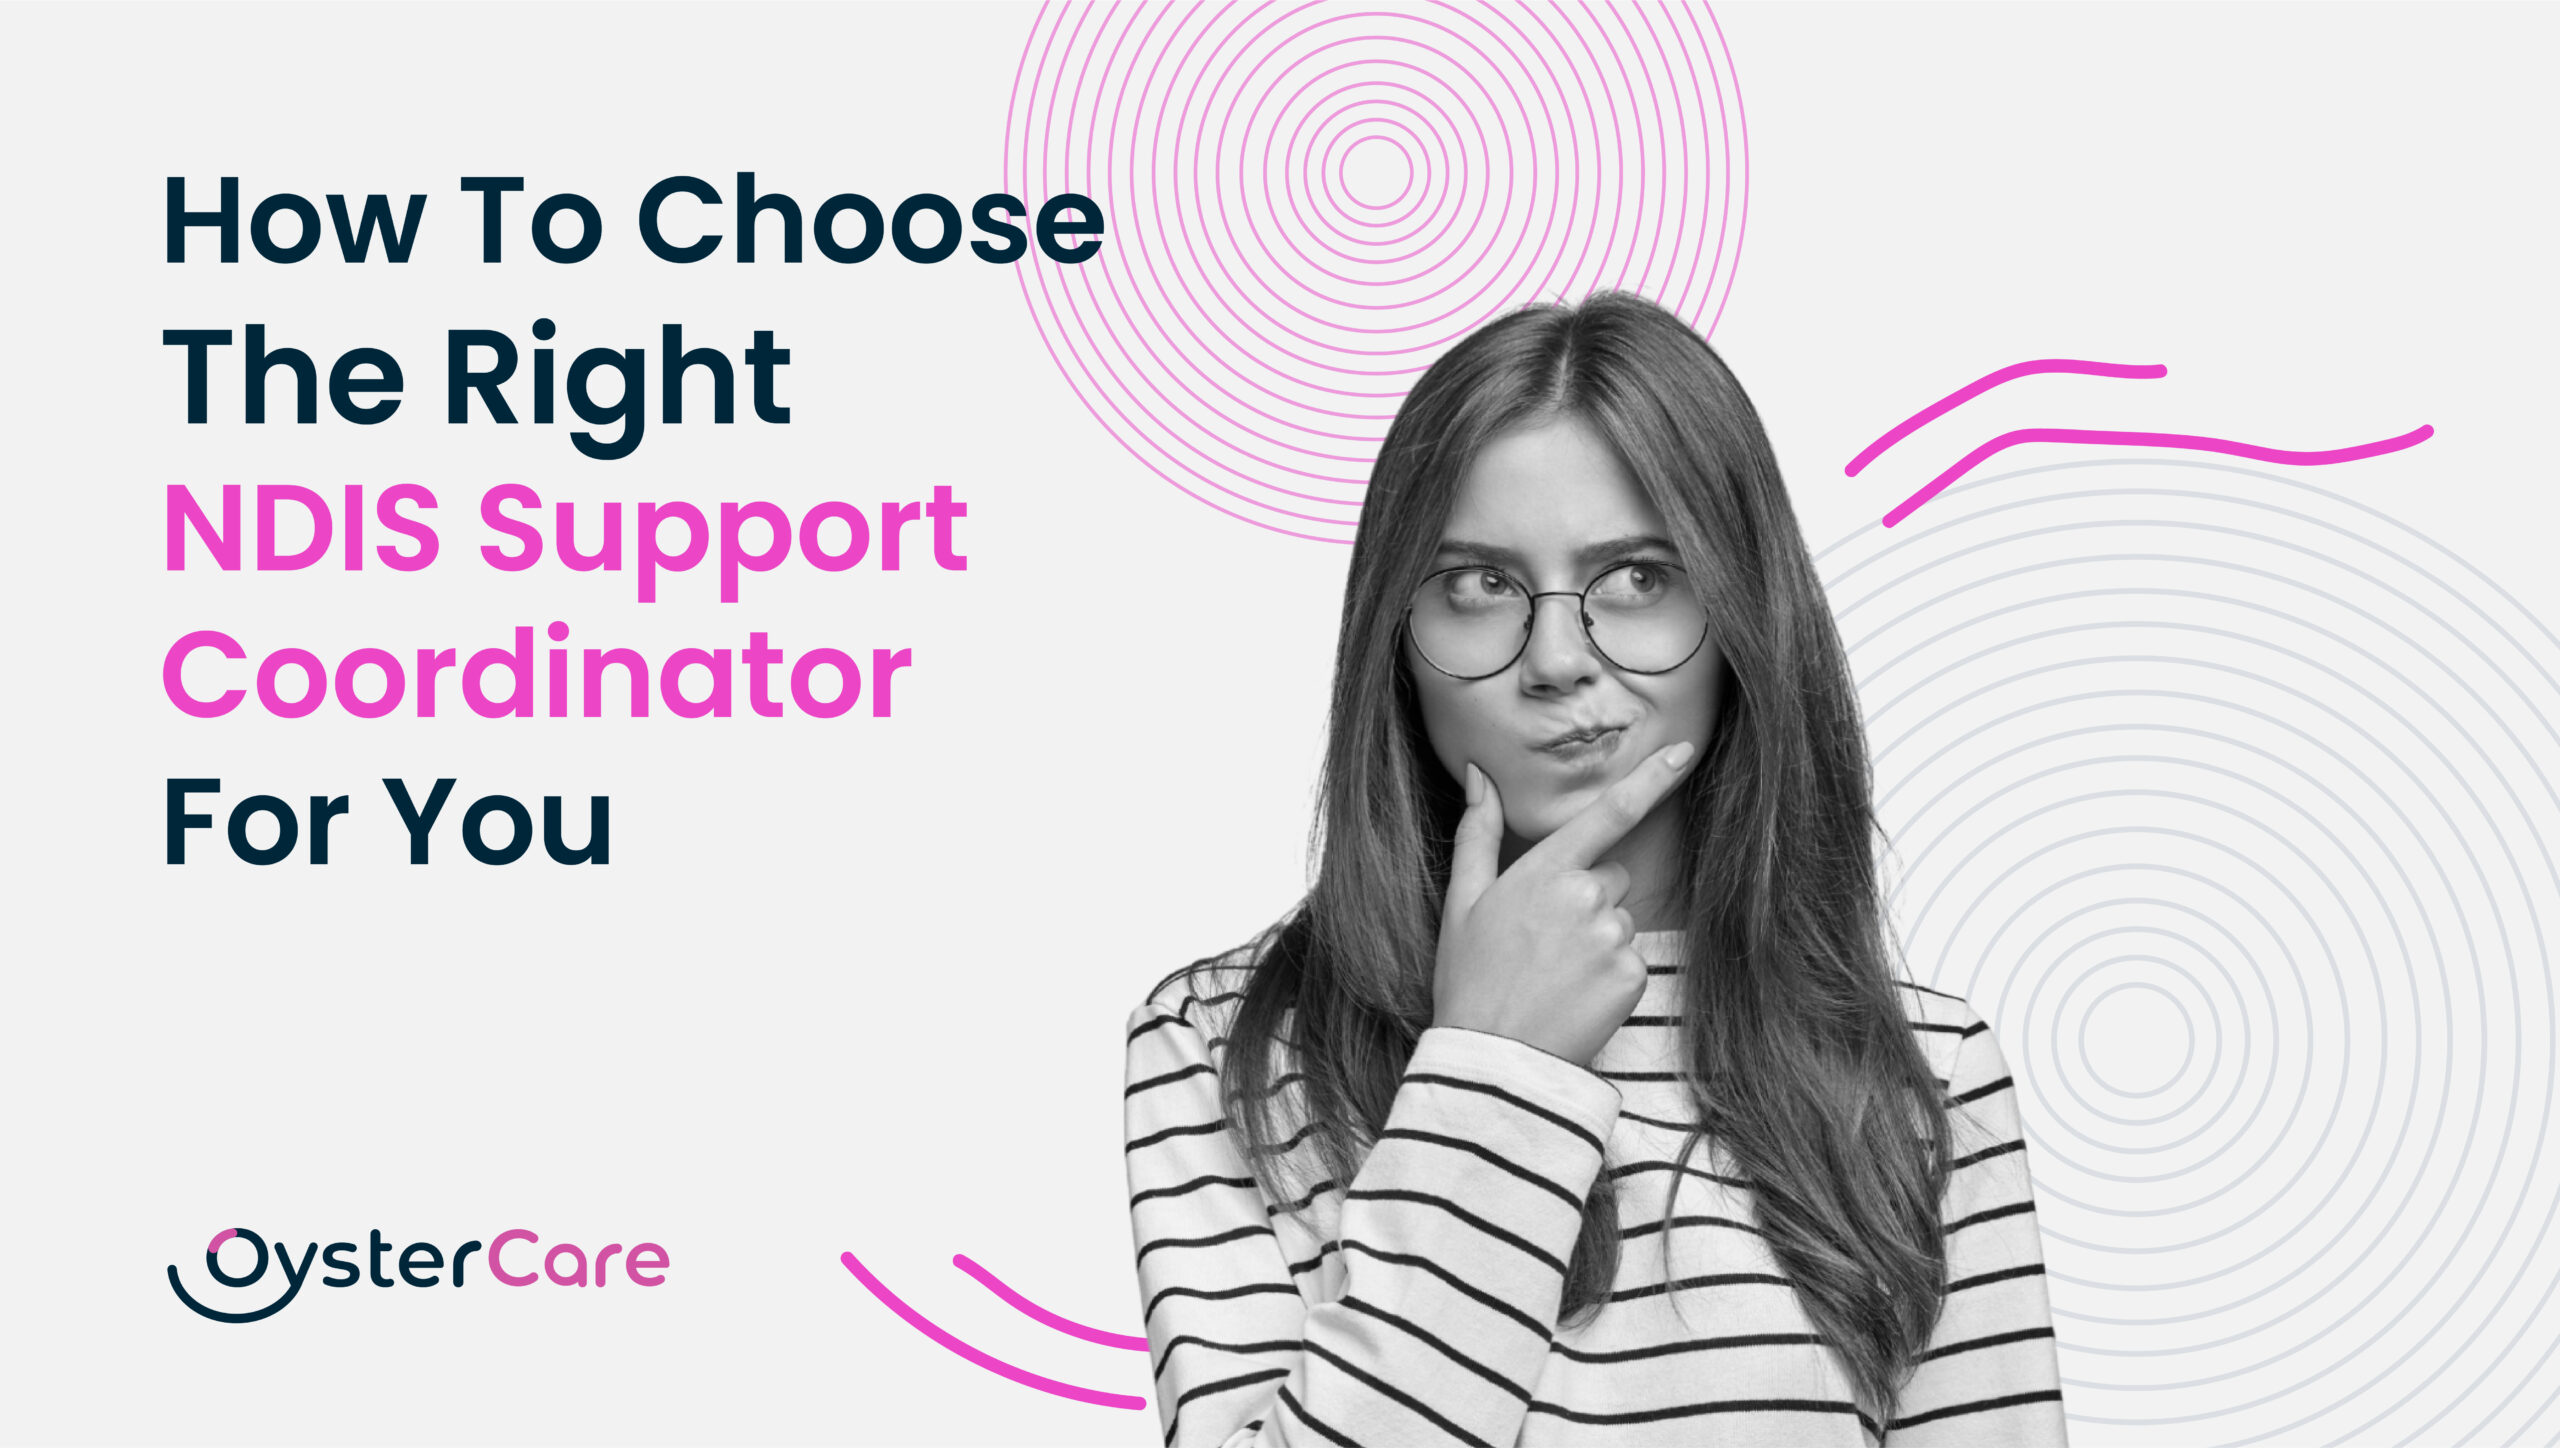 3) How To Choose The Right NDIS Support Coordinator For You